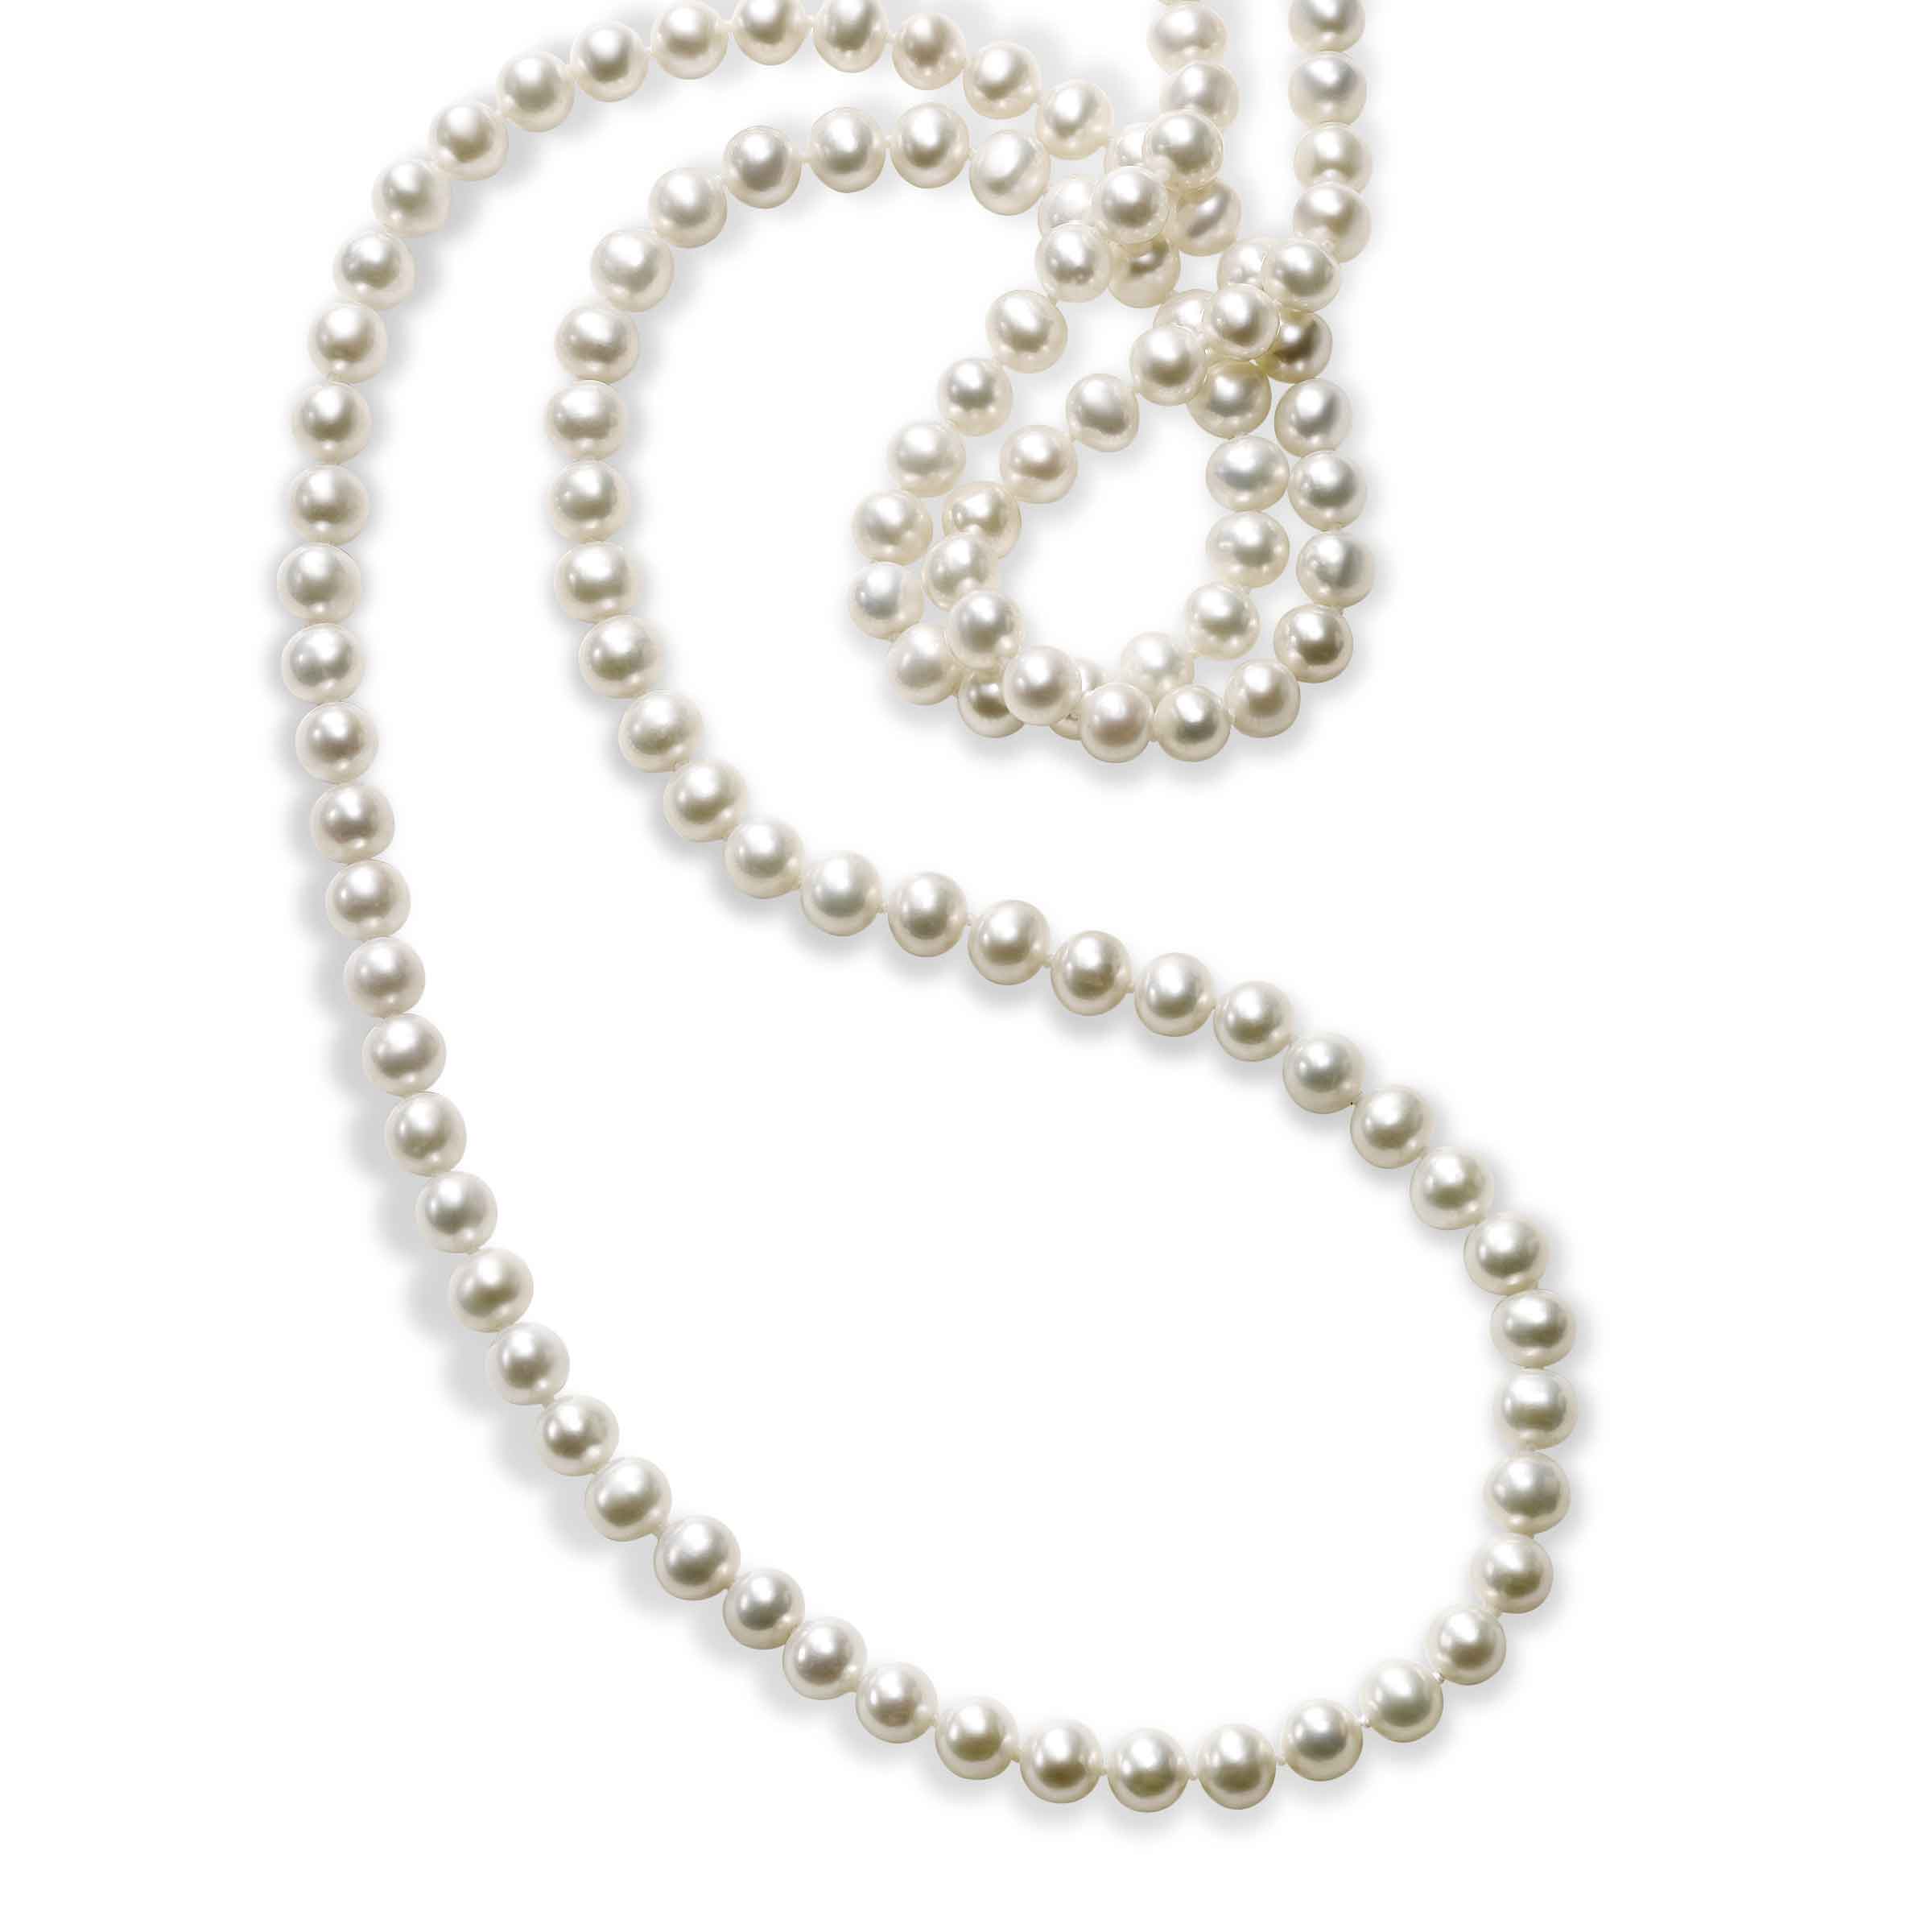 Buy ELEGANTDREAM Traditional white round pearls double line Chain necklace  pearlmala ethnic jewellery moti haram 30 inches 1 Gram Gold For Women at  Amazon.in